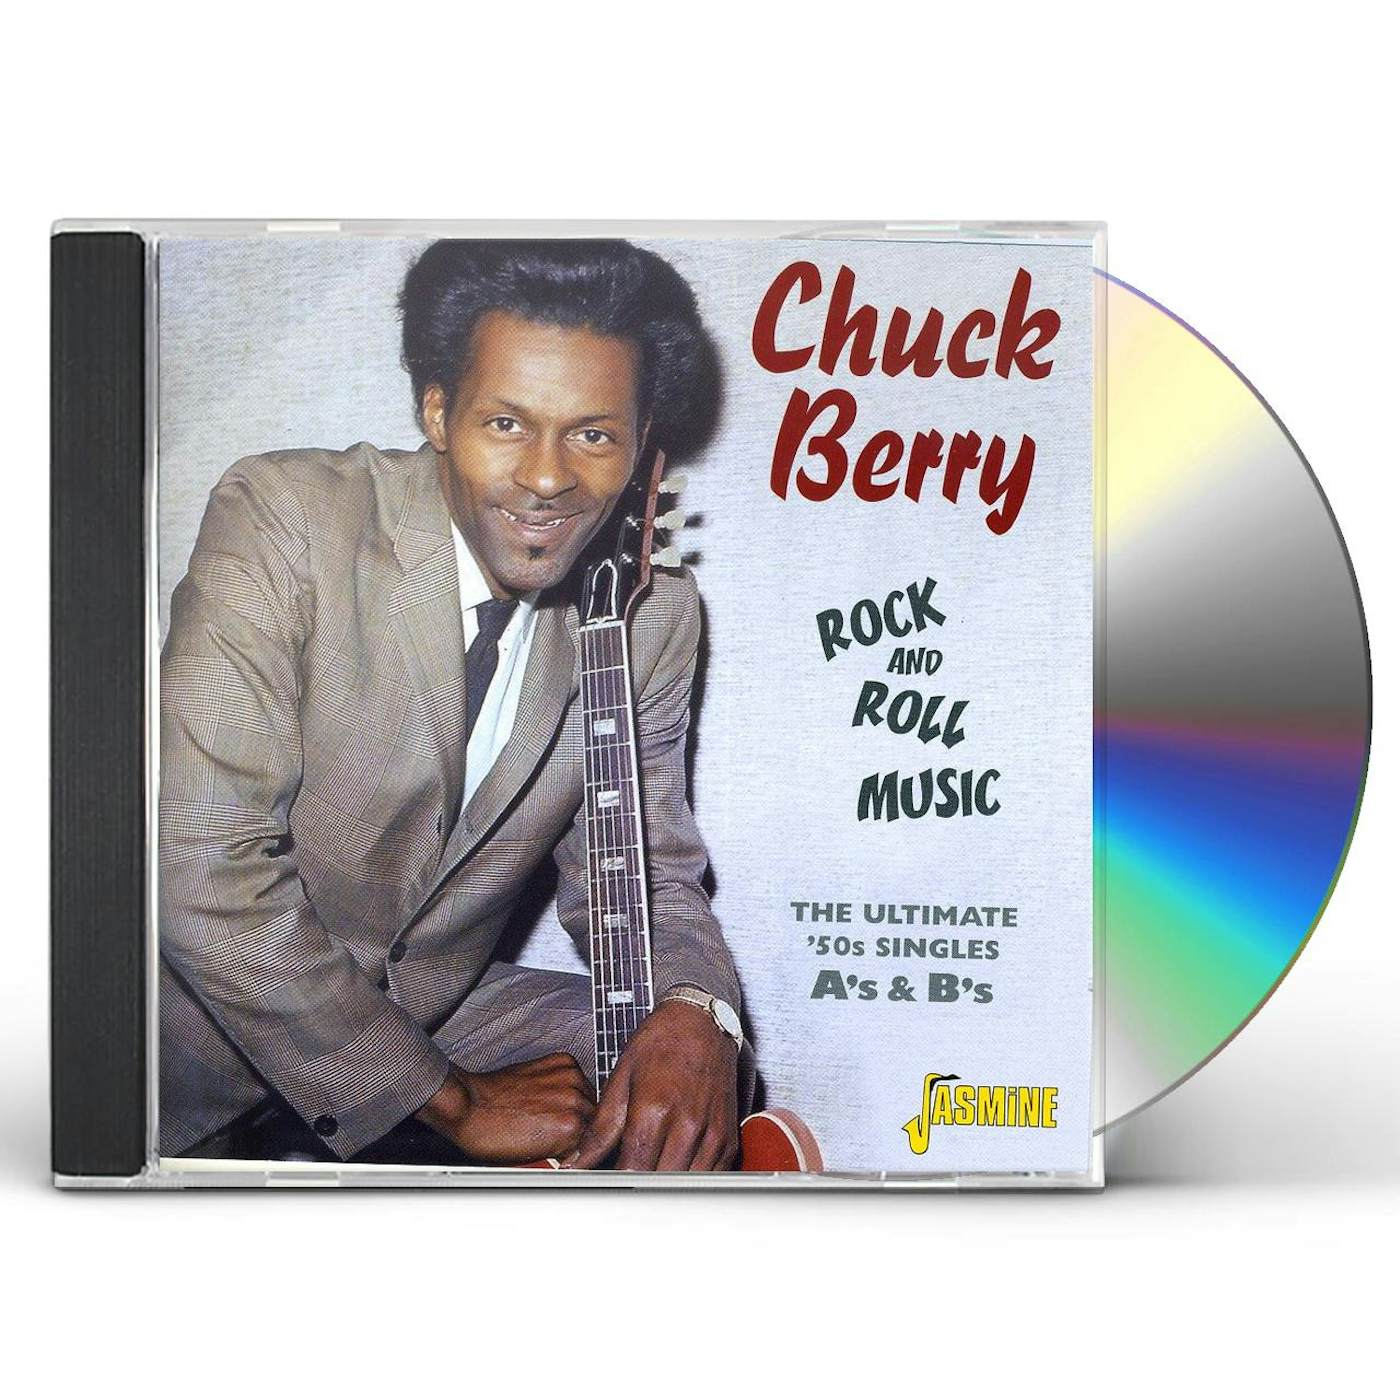 Chuck Berry ROCK & ROLL MUSIC & ULTIMATE 50'S COLLECTION CD